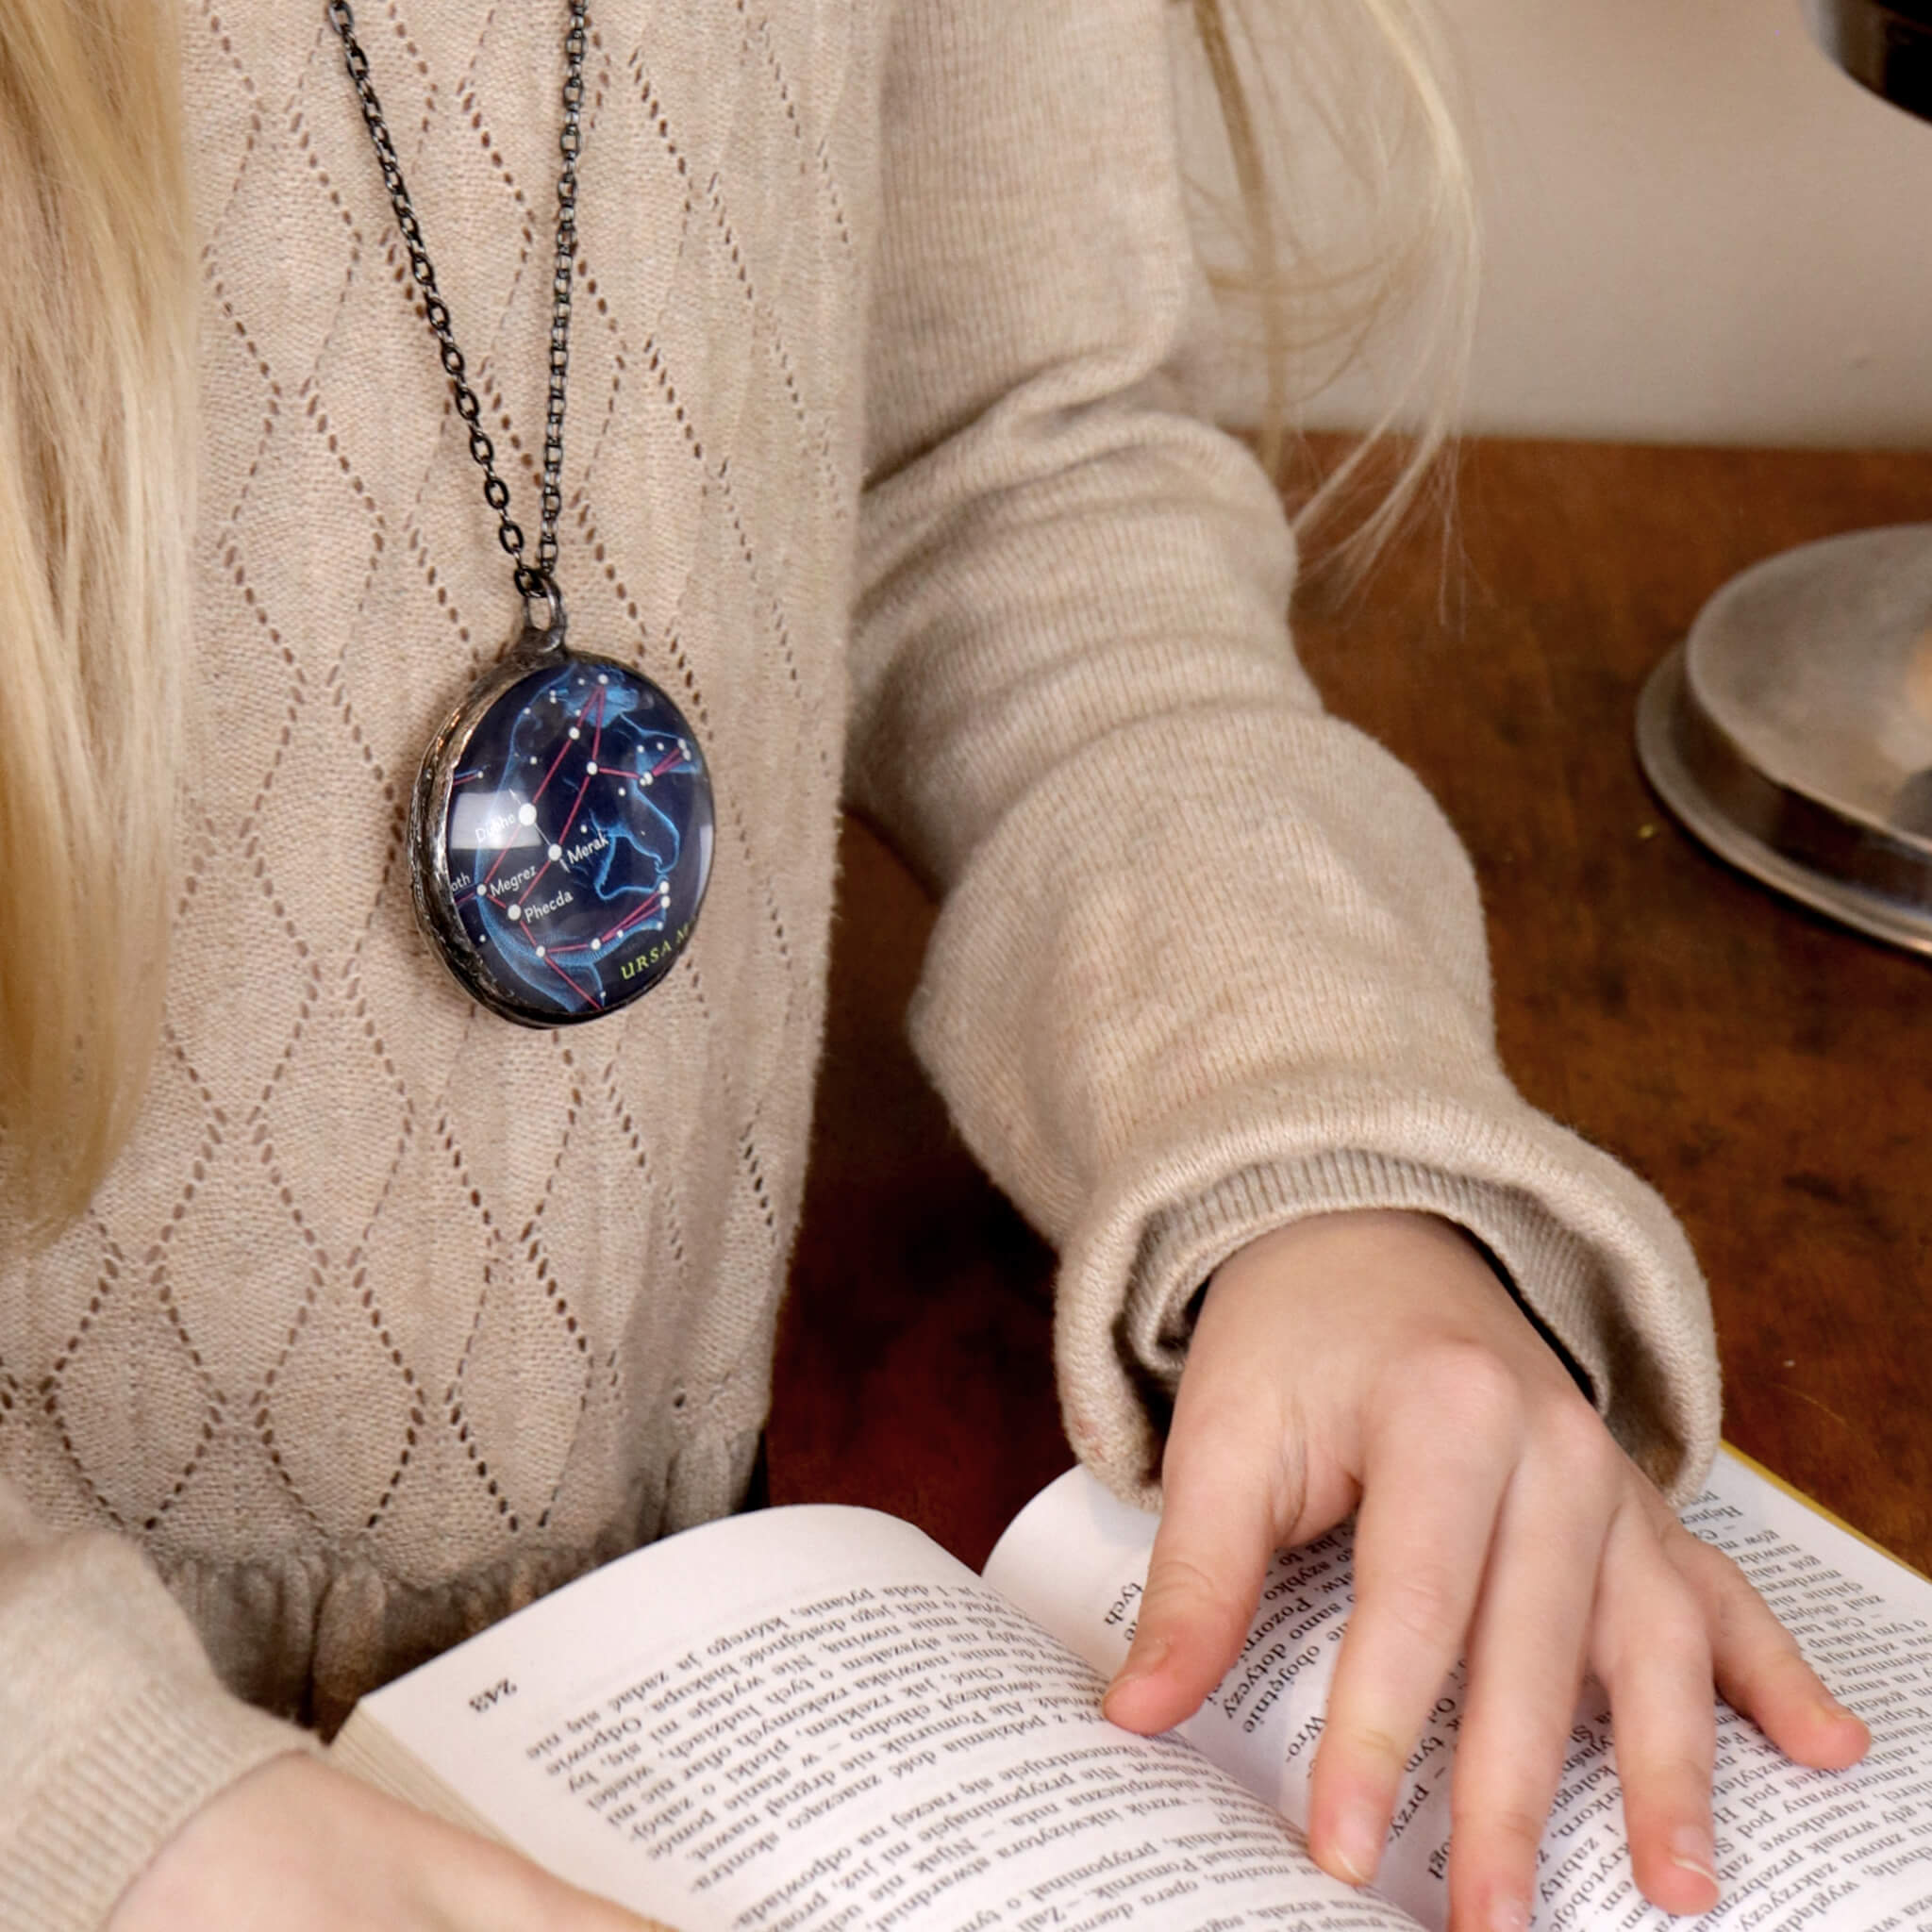 Girl wearing Ursa Major stained glass necklace